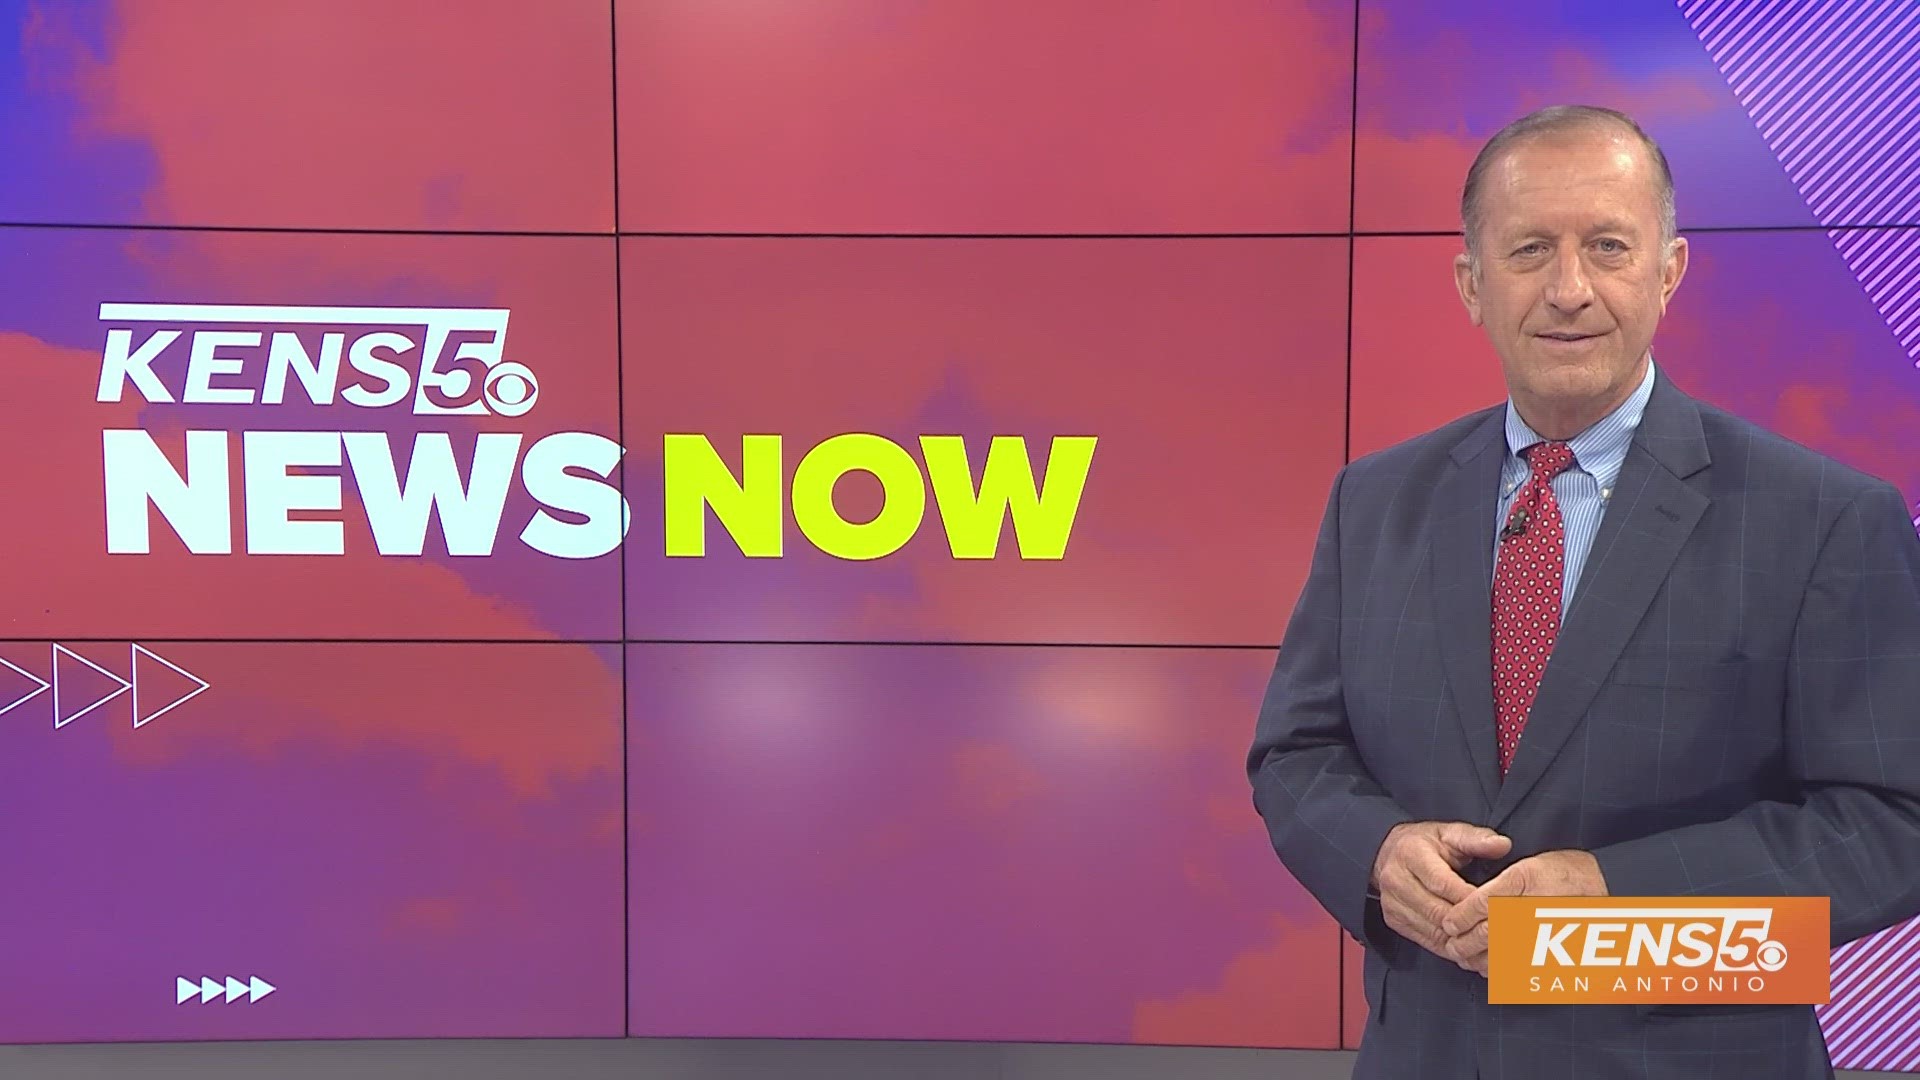 Follow us here to get the latest top headlines with the KENS 5 News team every weekday on KENS 5!